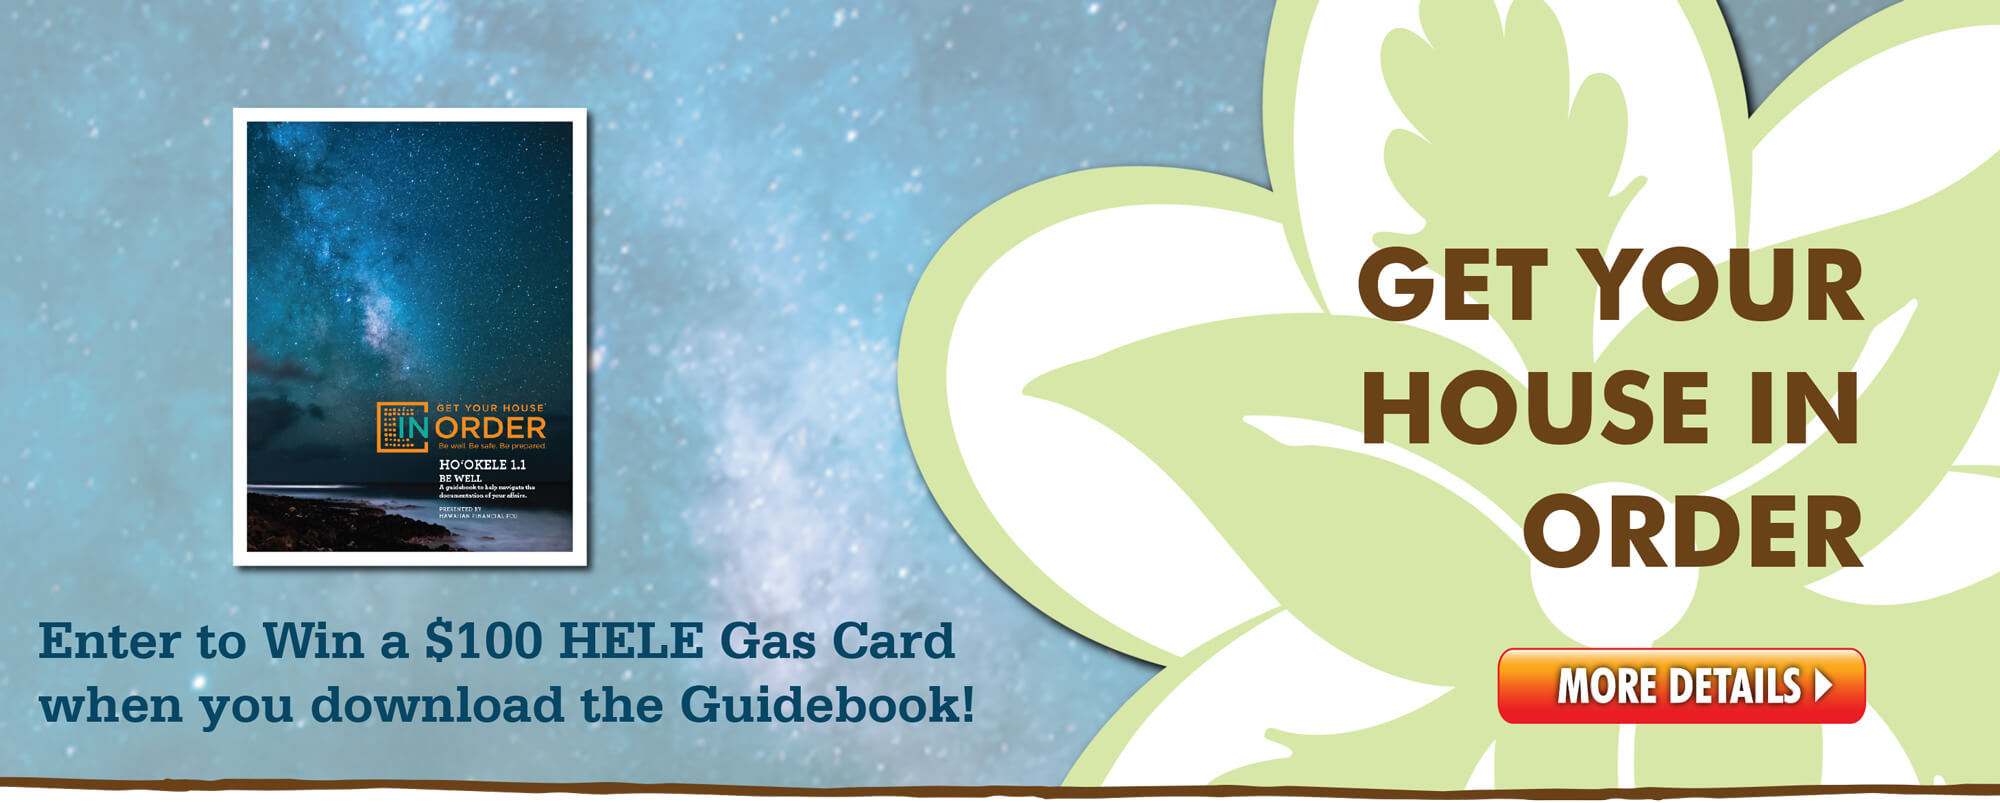 Hele Mai and Get Your House in Order!  Download the Ho'okele Guidebook today and enter to win a $100 Hele Gas Card!